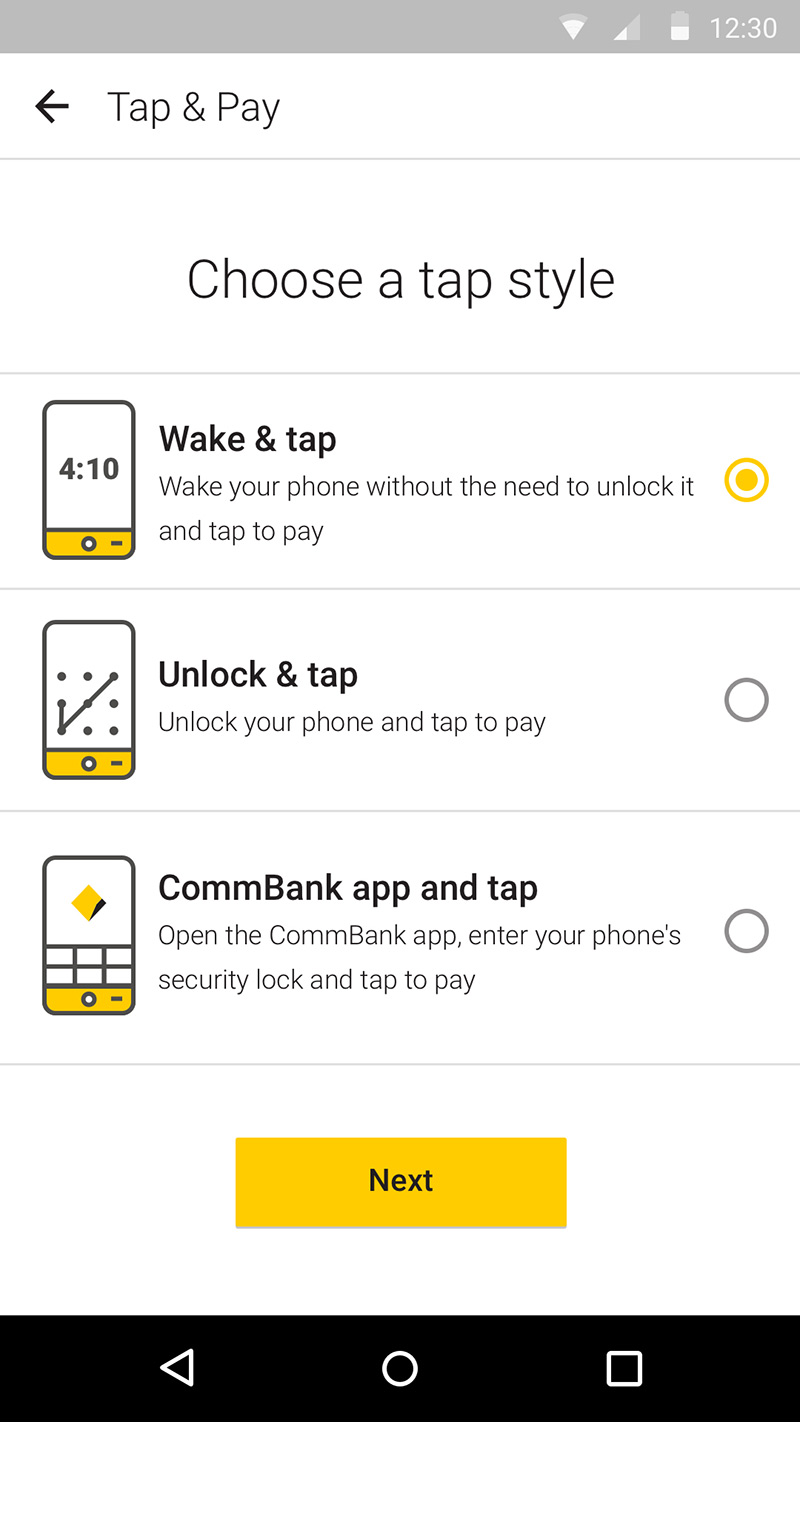 CommBank app Tap & Pay - Choose how to pay (Wake & tap is selected)